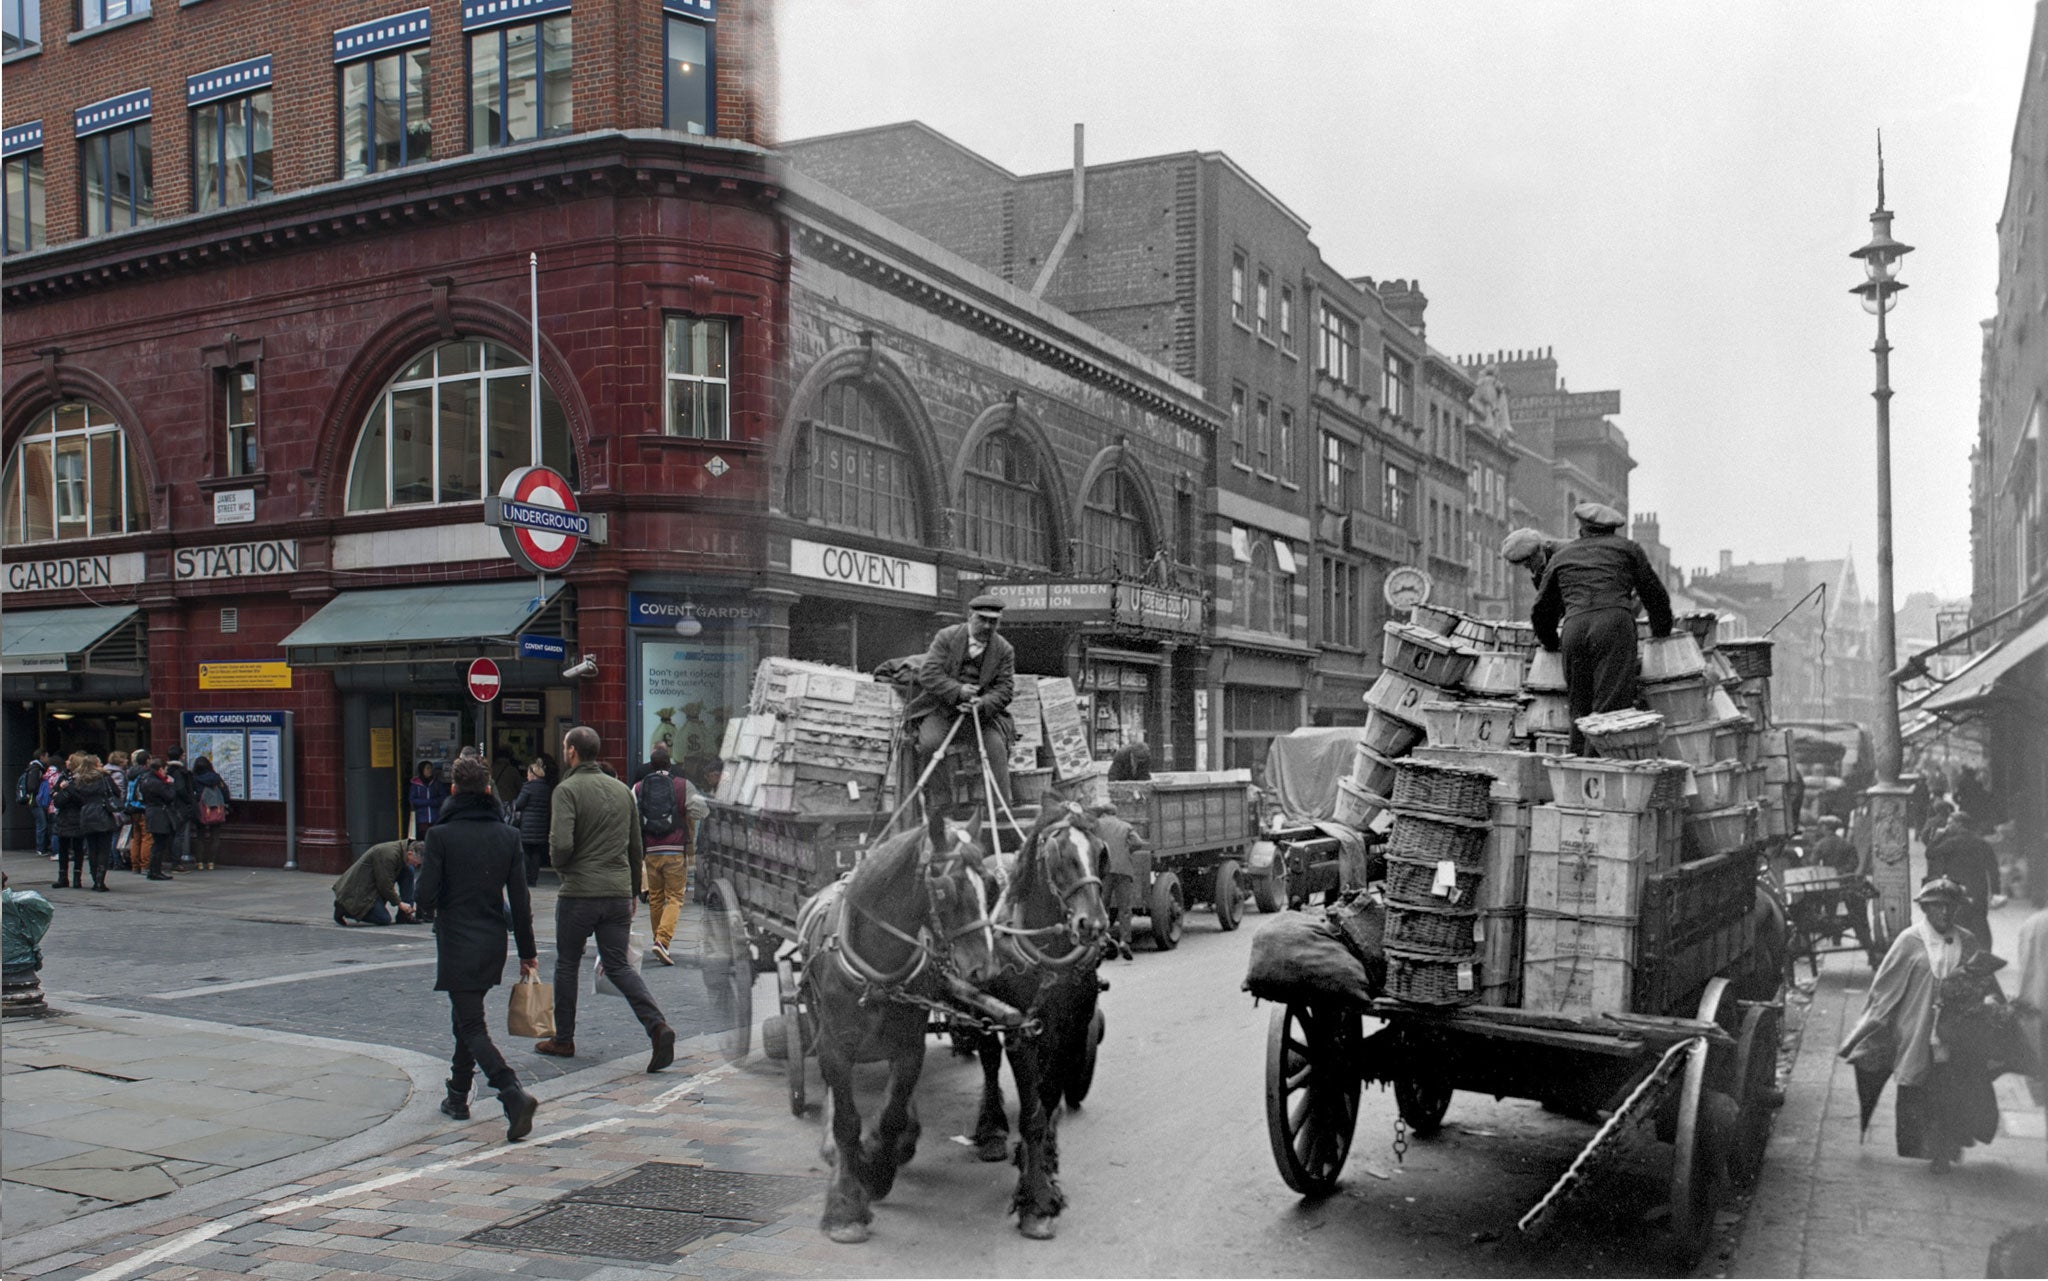 A street scene in London’s Covent Garden with the underground station and a horse and cart in the background in c.1930 and  the same street in 2014